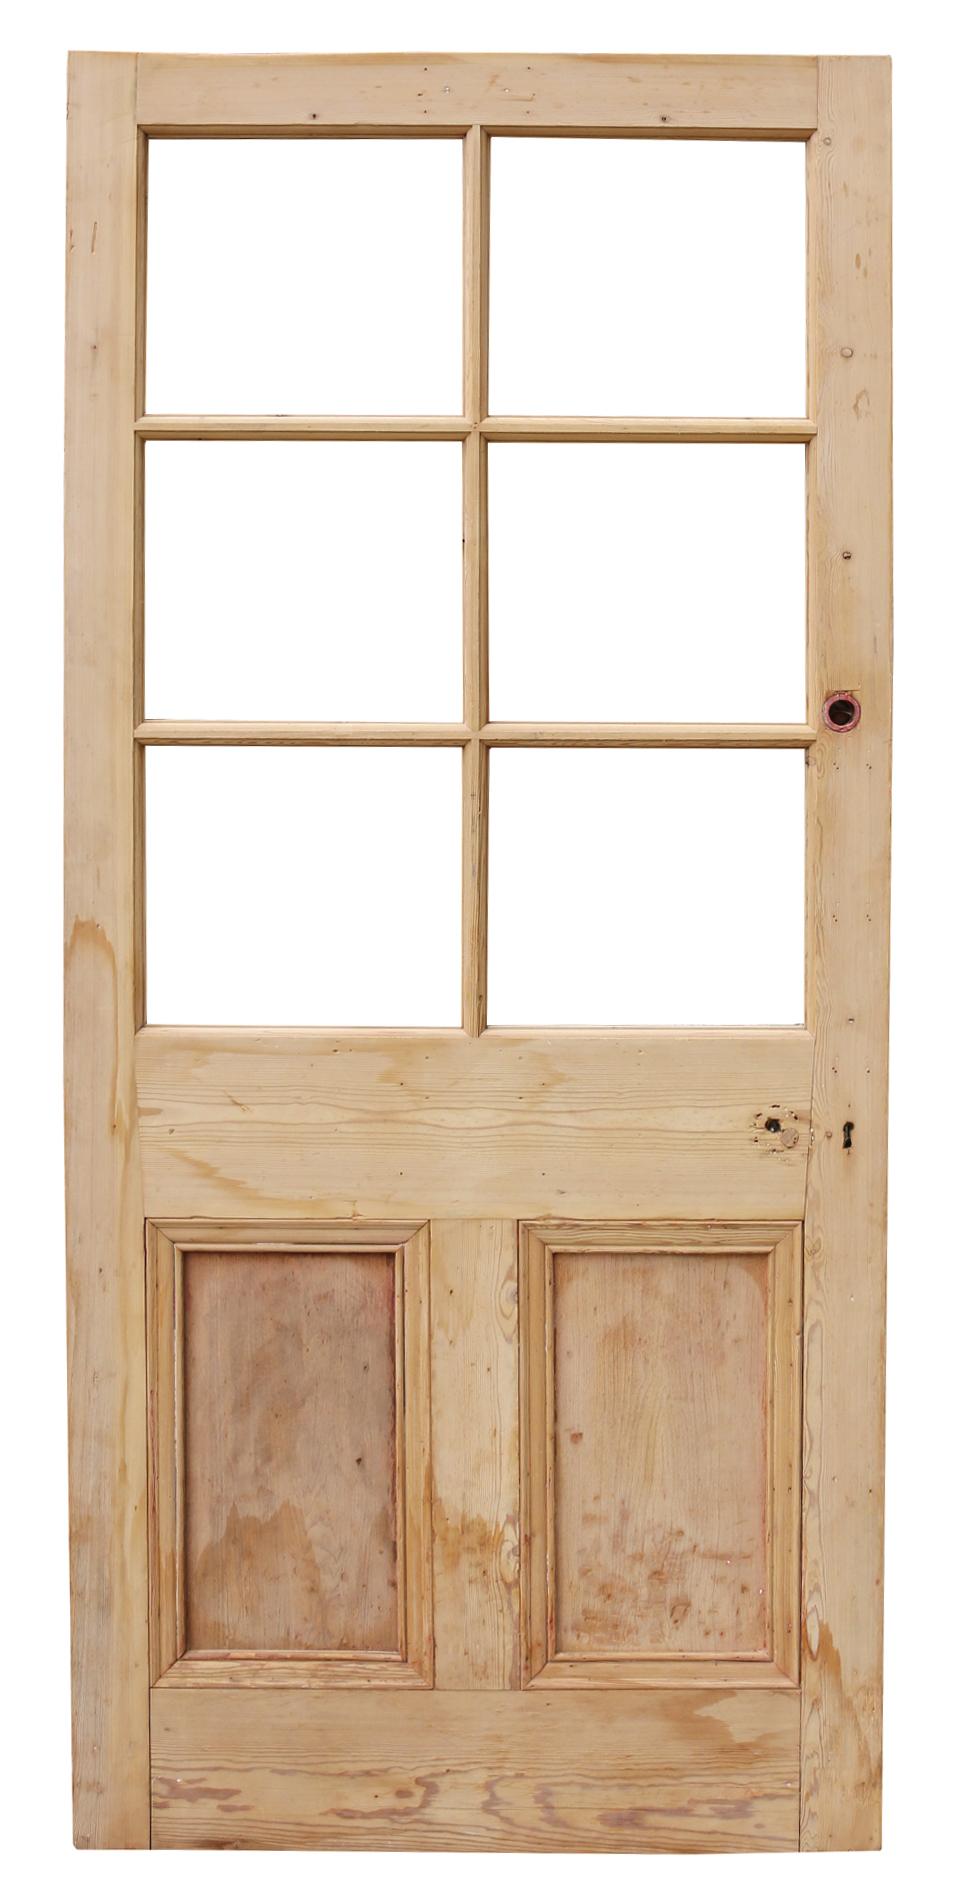 A reclaimed Victorian stripped pine door. Suitable for interior or exterior use. For glazing.